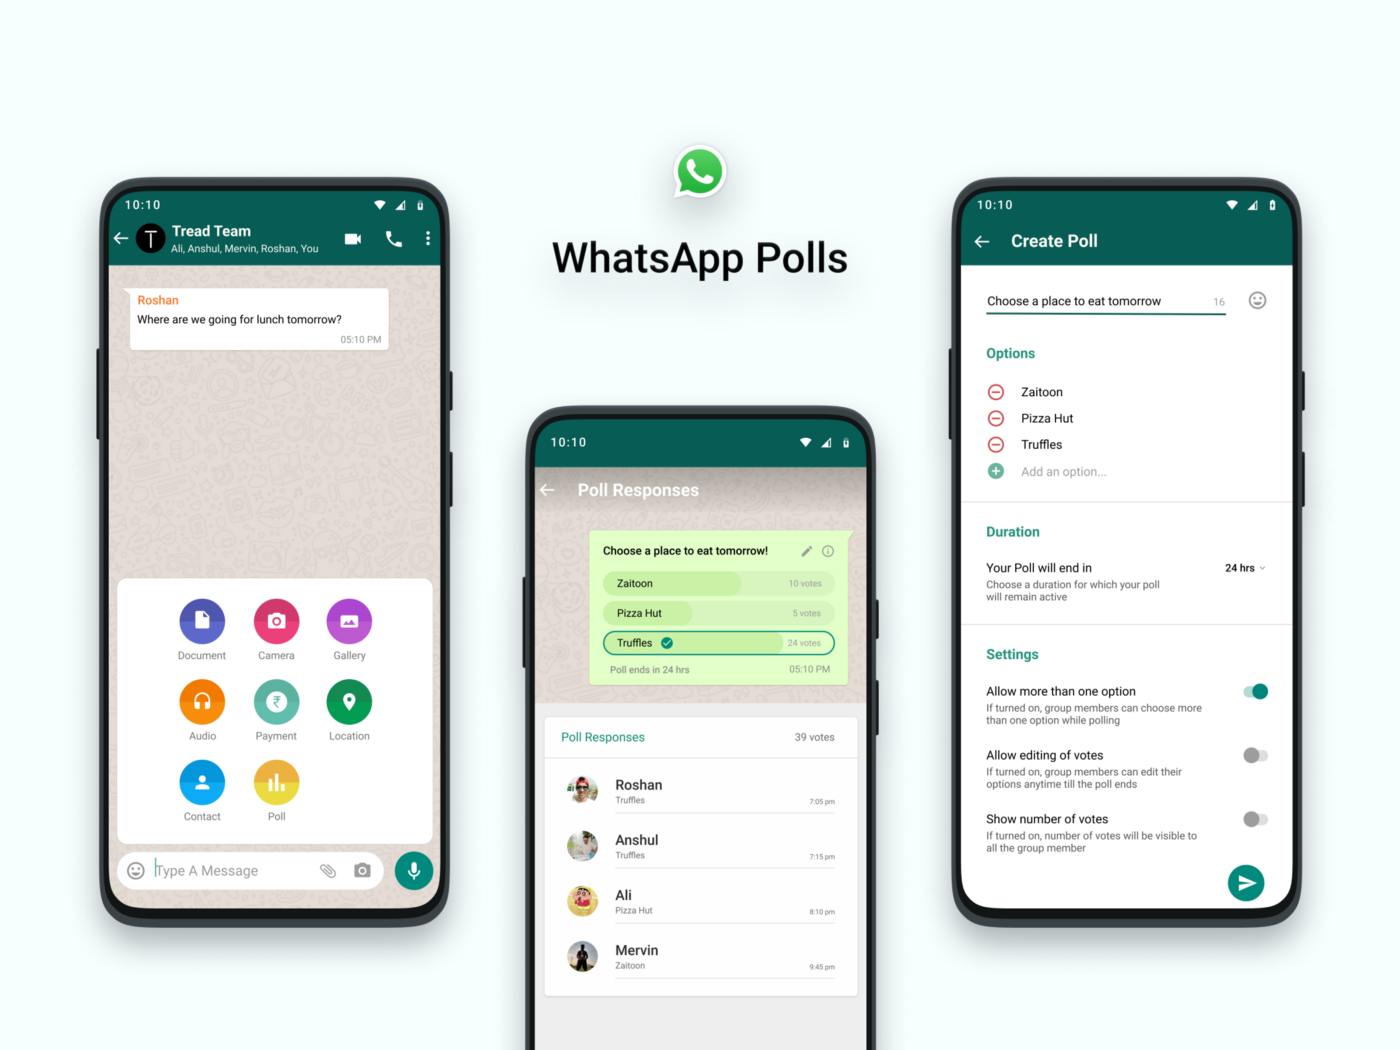 You can now take polls on WhatsApp